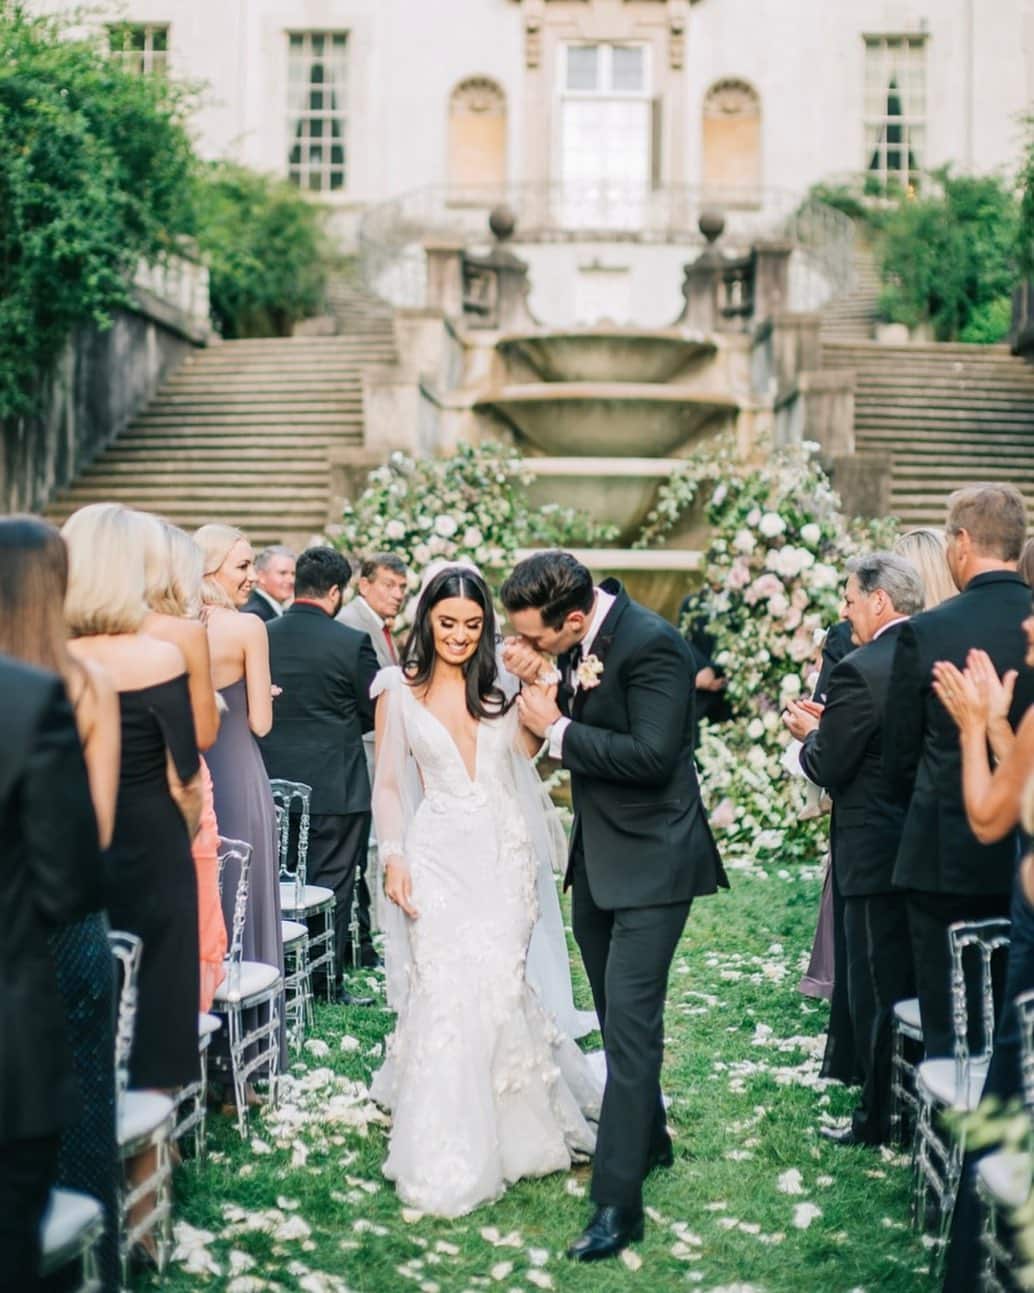 This Fairytale Wedding at the Bride's Family Home on Martha's